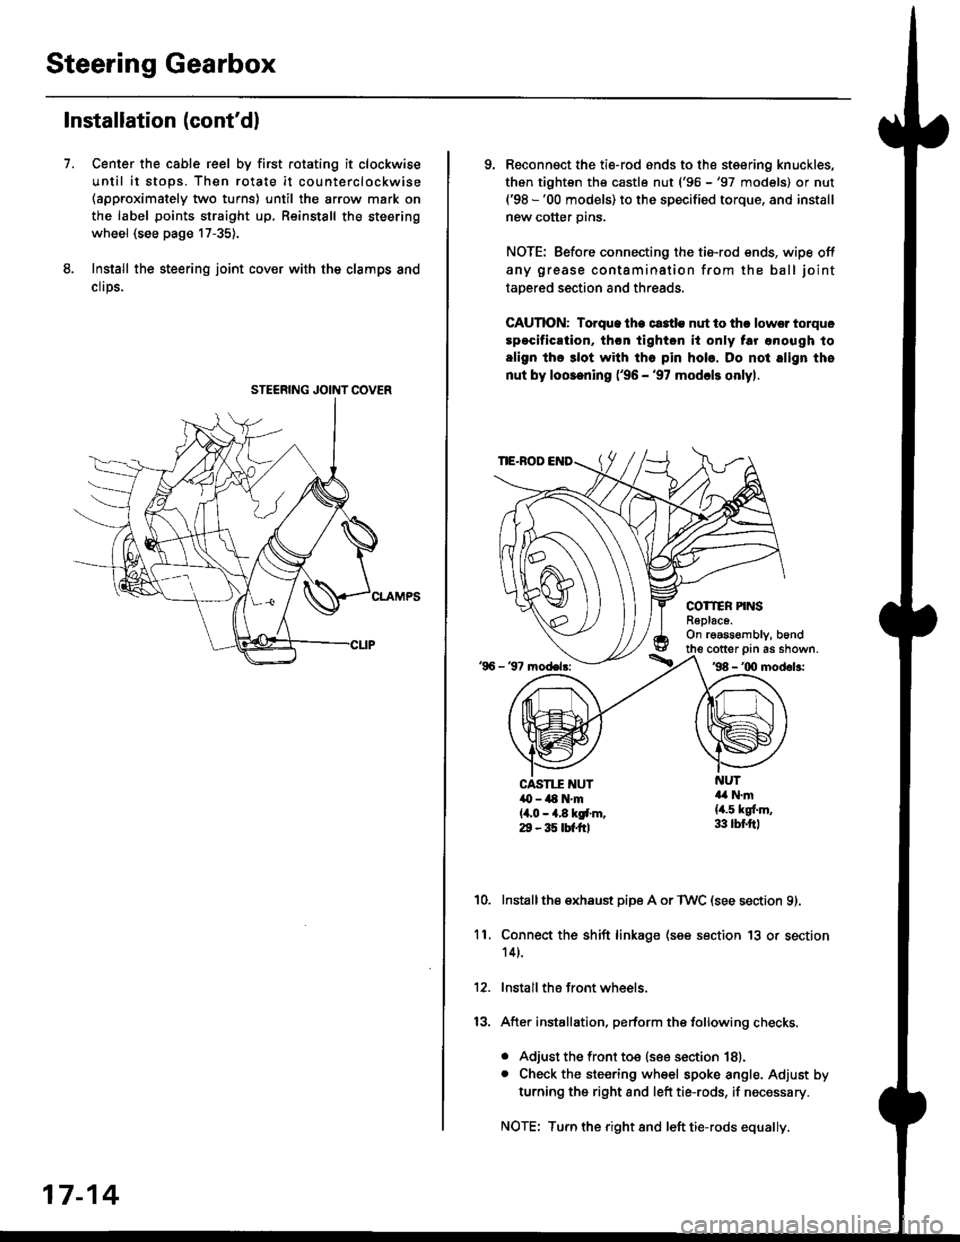 HONDA CIVIC 1996 6.G User Guide Steering Gearbox
Installation (contdl
Center the cable reel by first rotating it clockwise
until it stops. Then rotate it counterclockwise(approximately two turns) until the arrow mark on
the label p